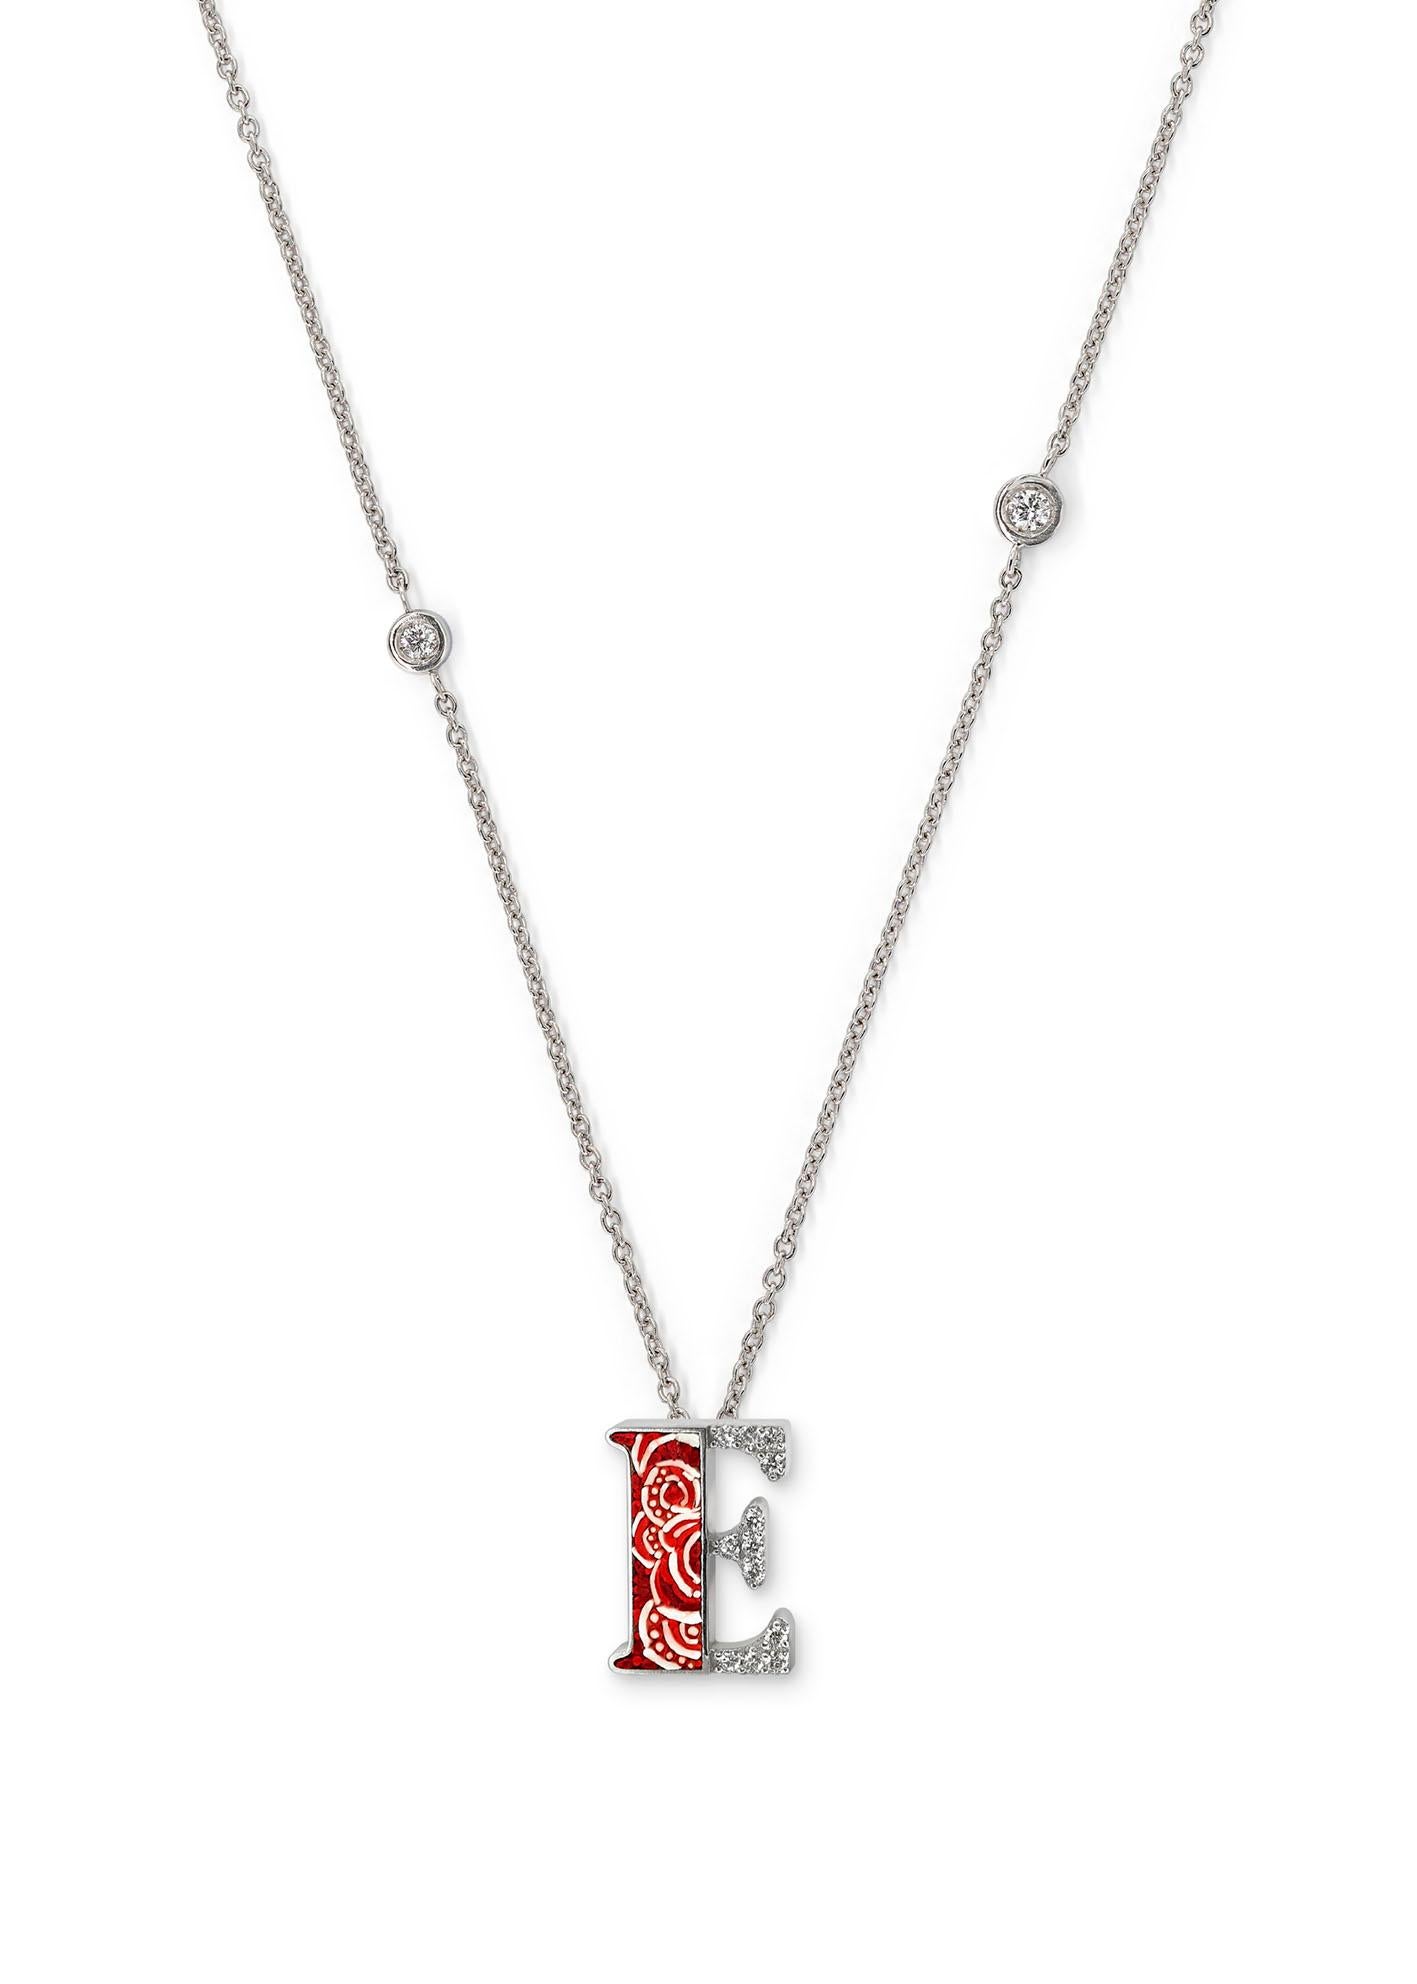 Brilliant Cut Necklace Letter E White Gold White Diamonds Hand Decorated with Micromosaic For Sale